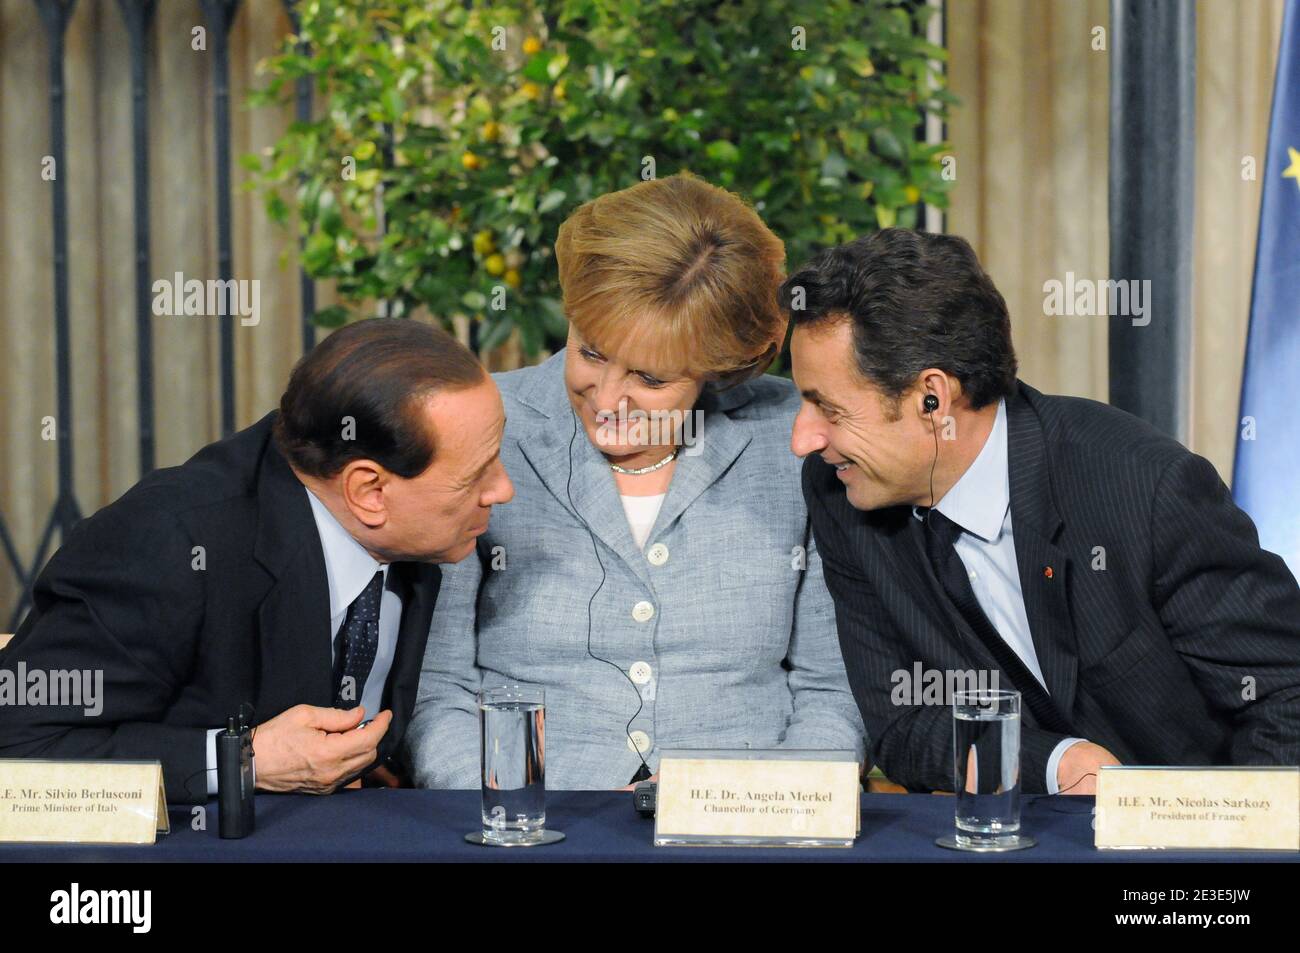 (R-L) French President Nicolas Sarkozy and German Chancellor Angela Merkel and Italian Prime Minister Silvio Berlusconi seen during a joint press conference with other European leaders at the residence of Israeli Prime Minister Ehud Olmert in Jerusalem, Israel on January 18, 2009. Photo by Ammar Abd Rabbo/ABACAPRESS.COM Stock Photo